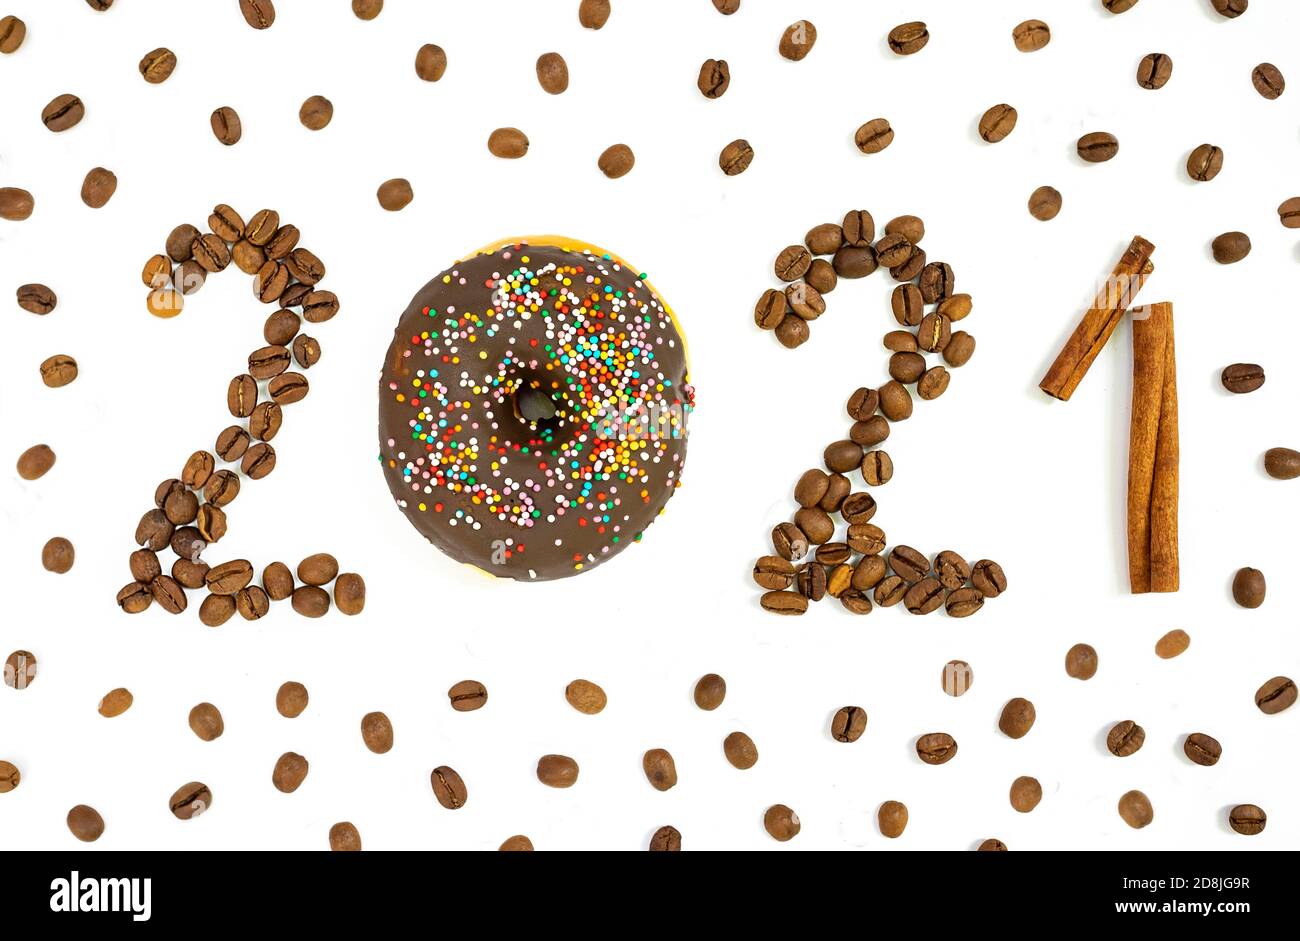 New year 2021 made of donut, coffee beans and cinnamon sticks on the white background. Stock Photo